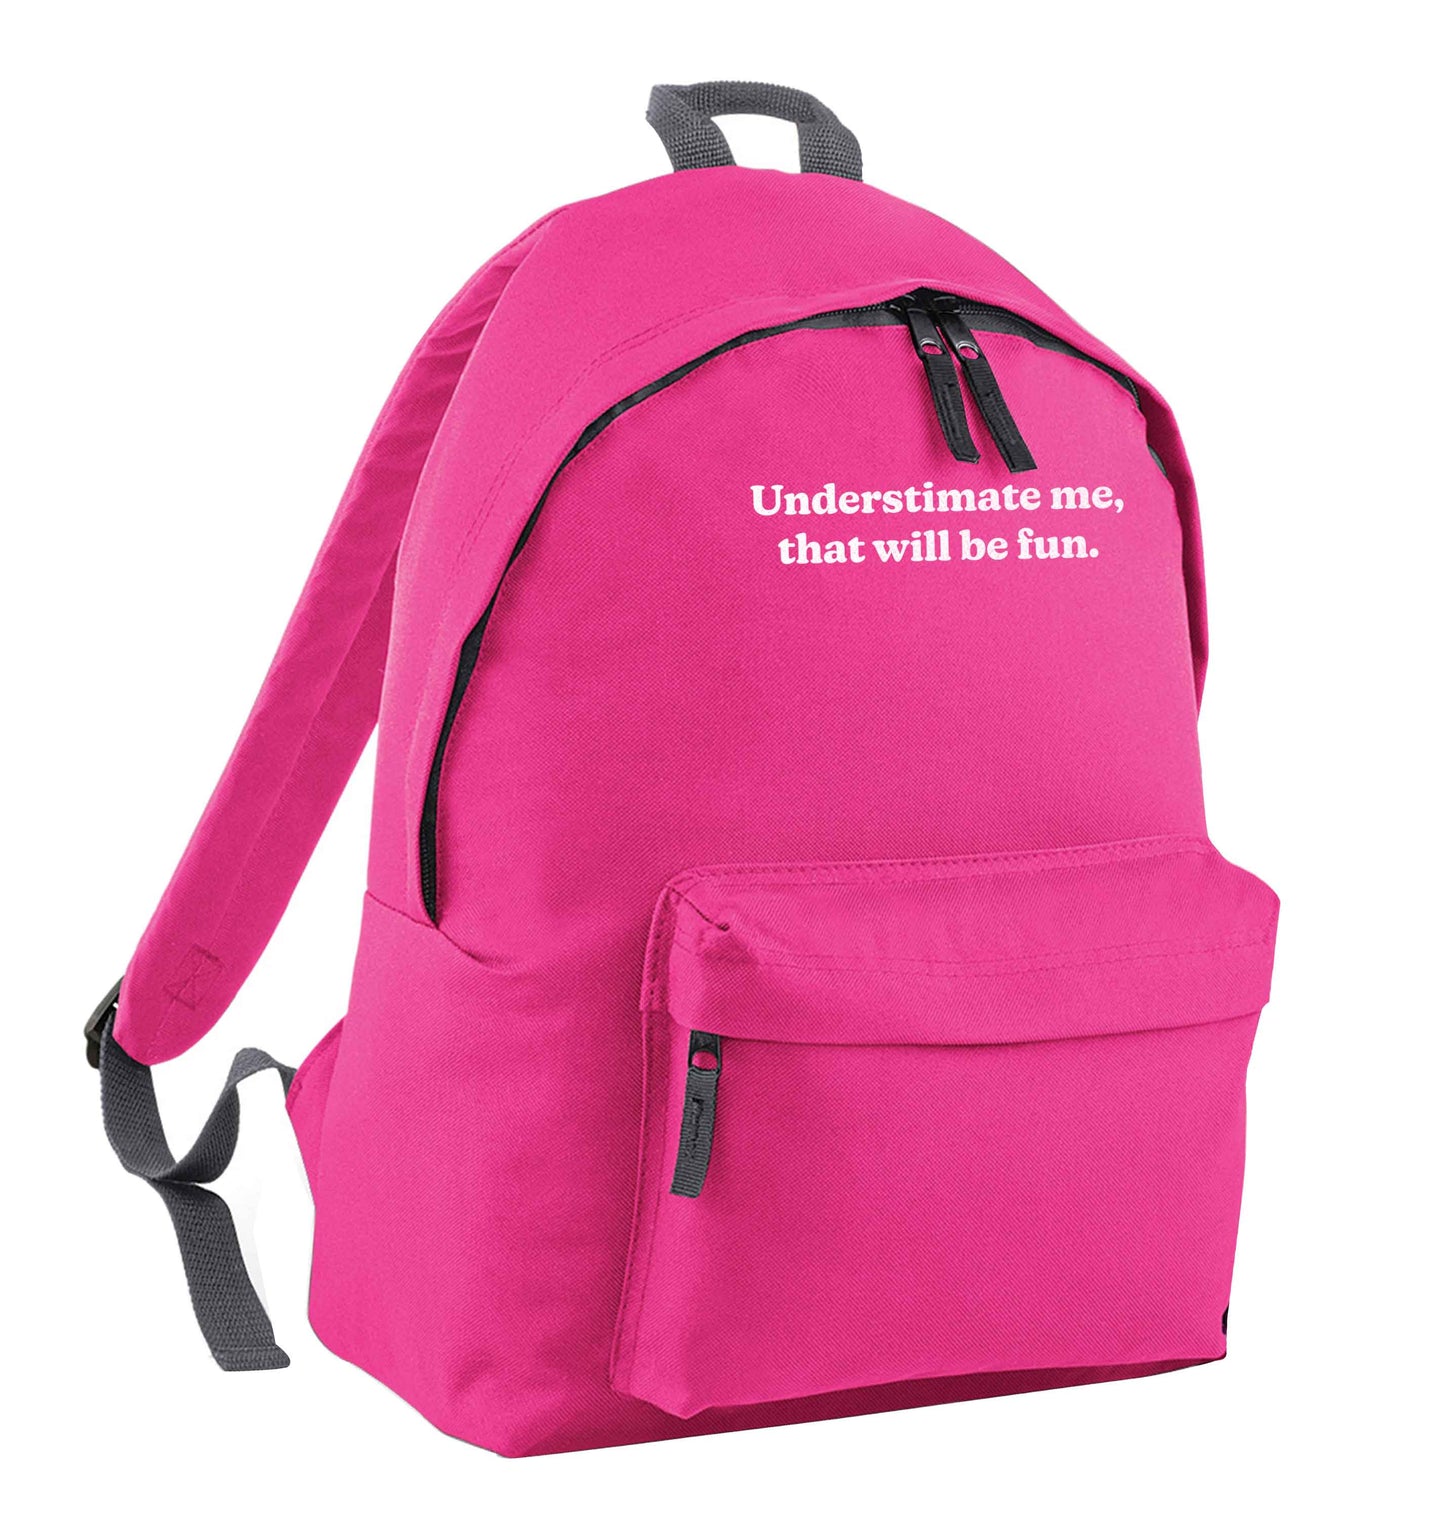 Underestimate me that will be fun pink children's backpack